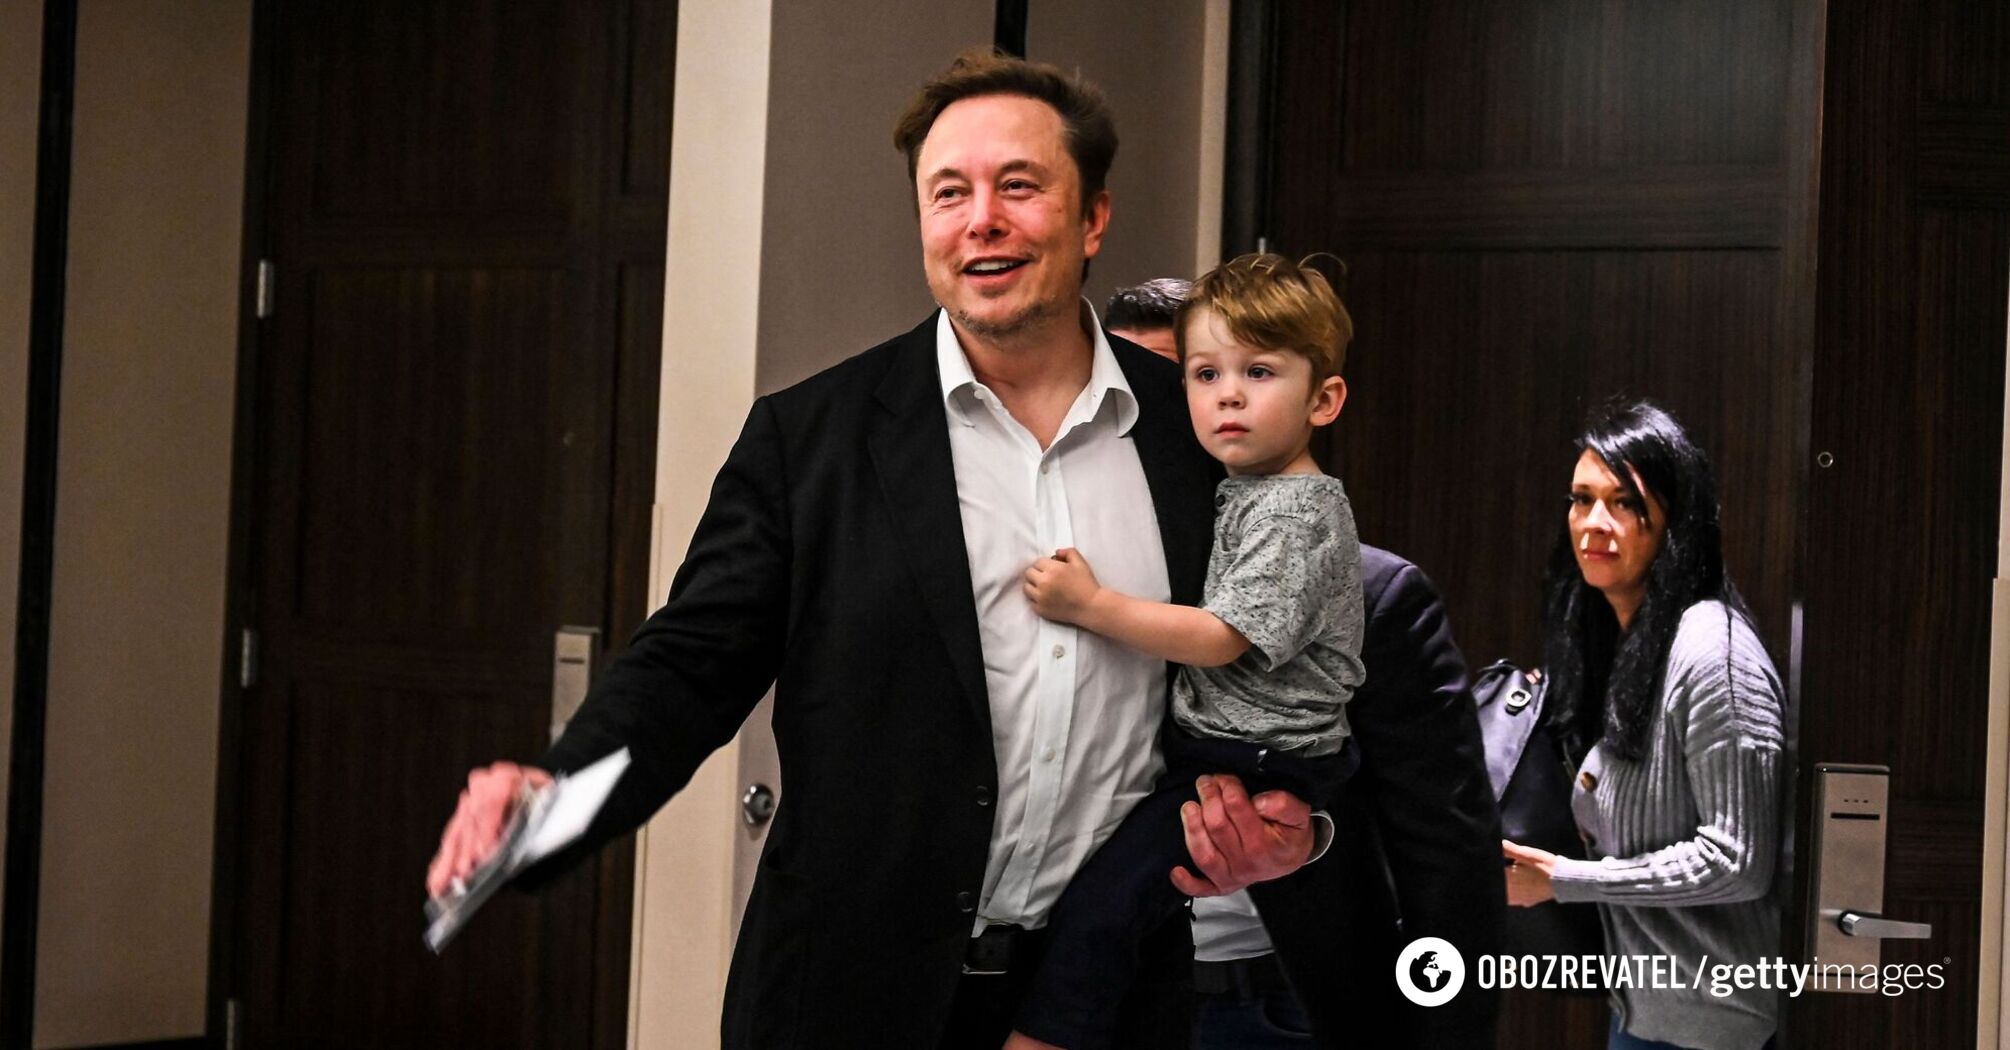 'My son is dead.' Elon Musk's transgender daughter reacted to her father's loud statement and told her version